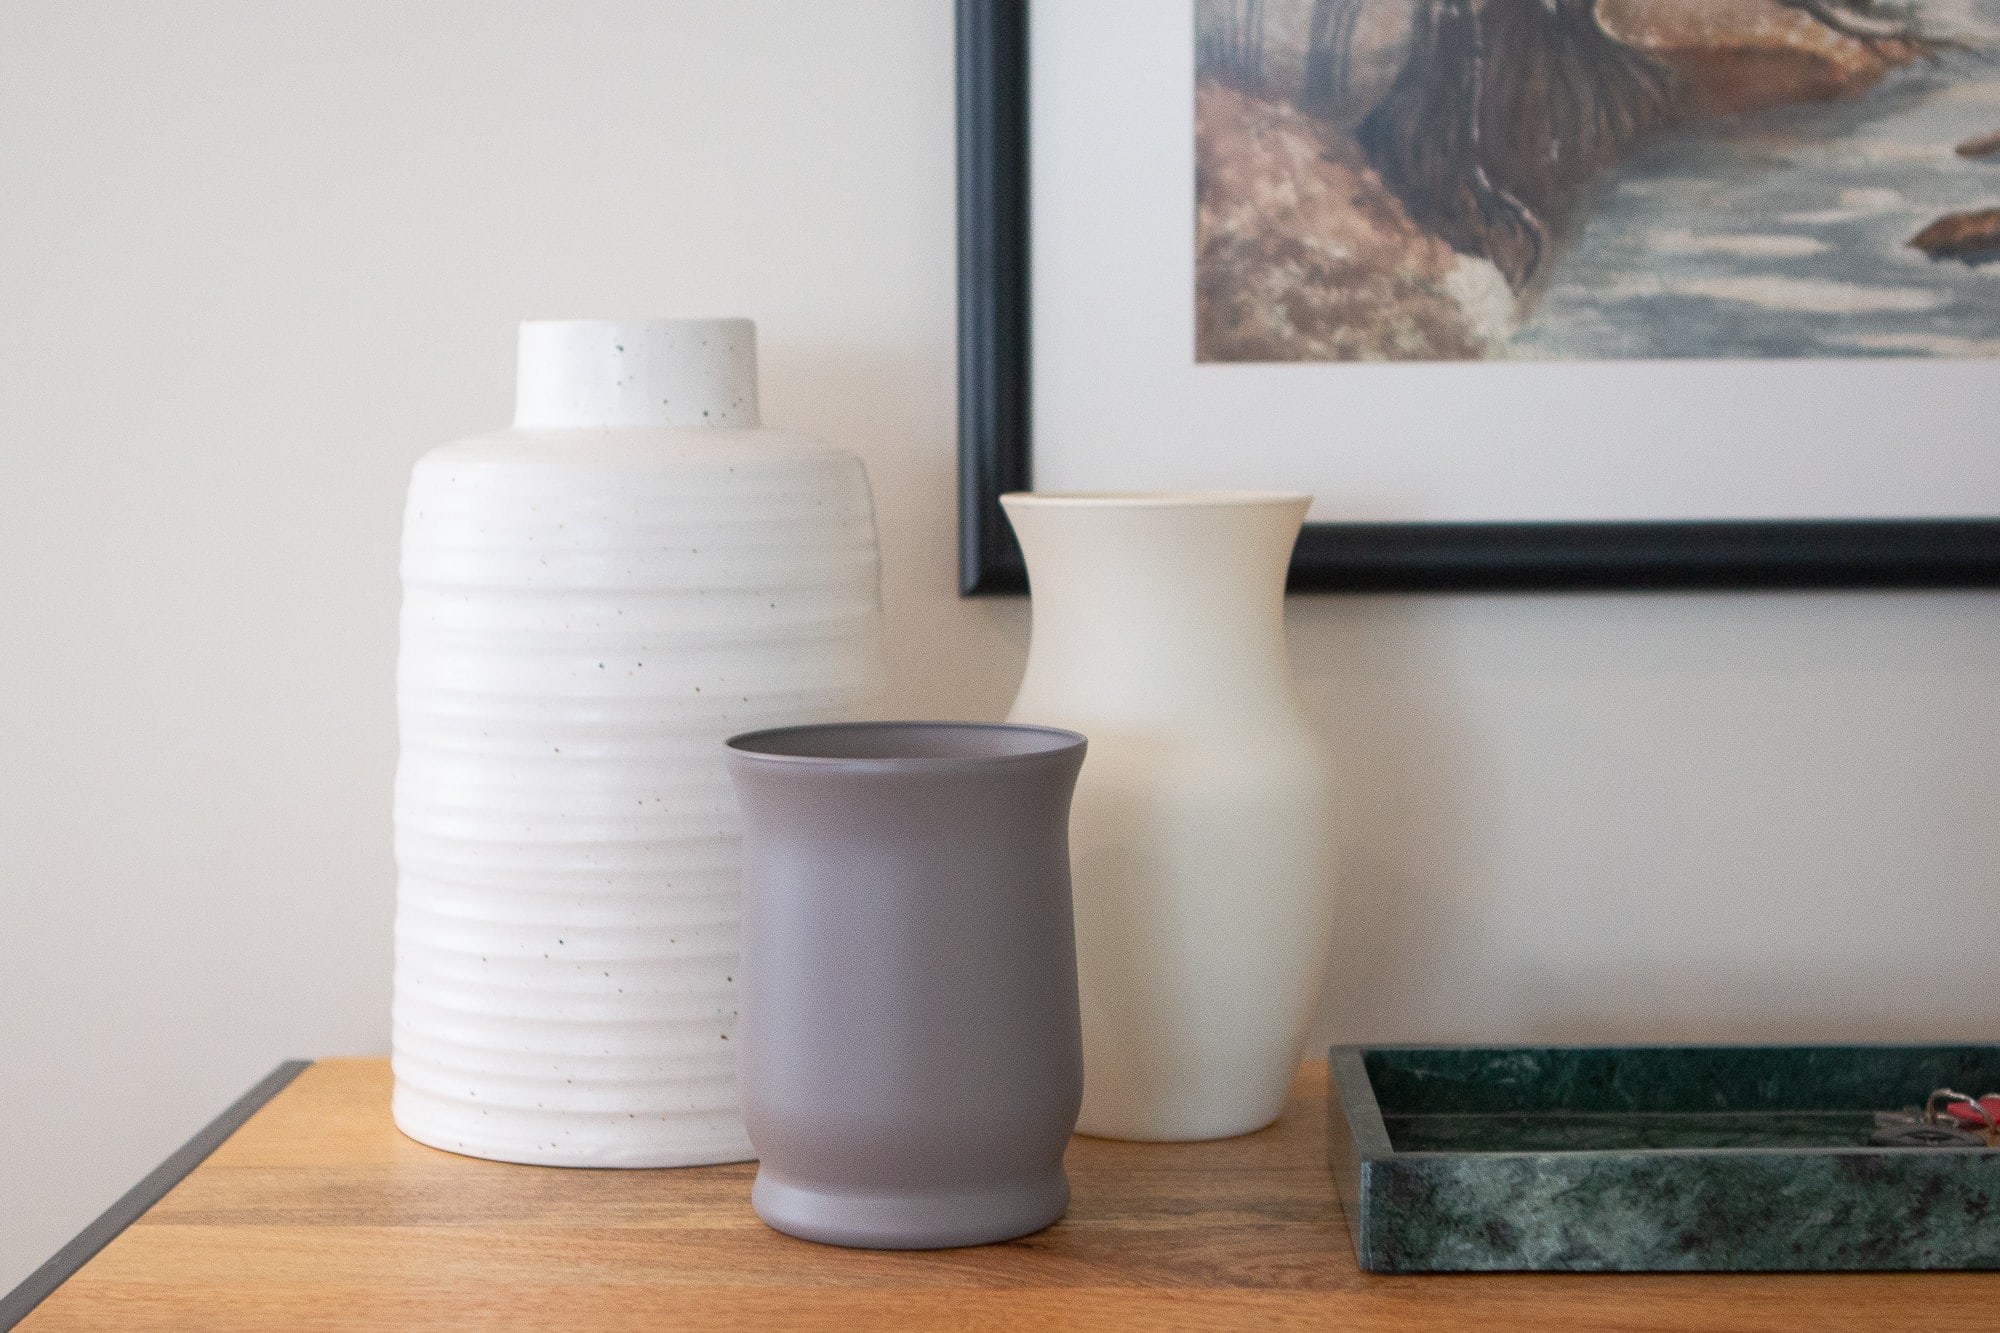 Chalk spray paint vases in the home